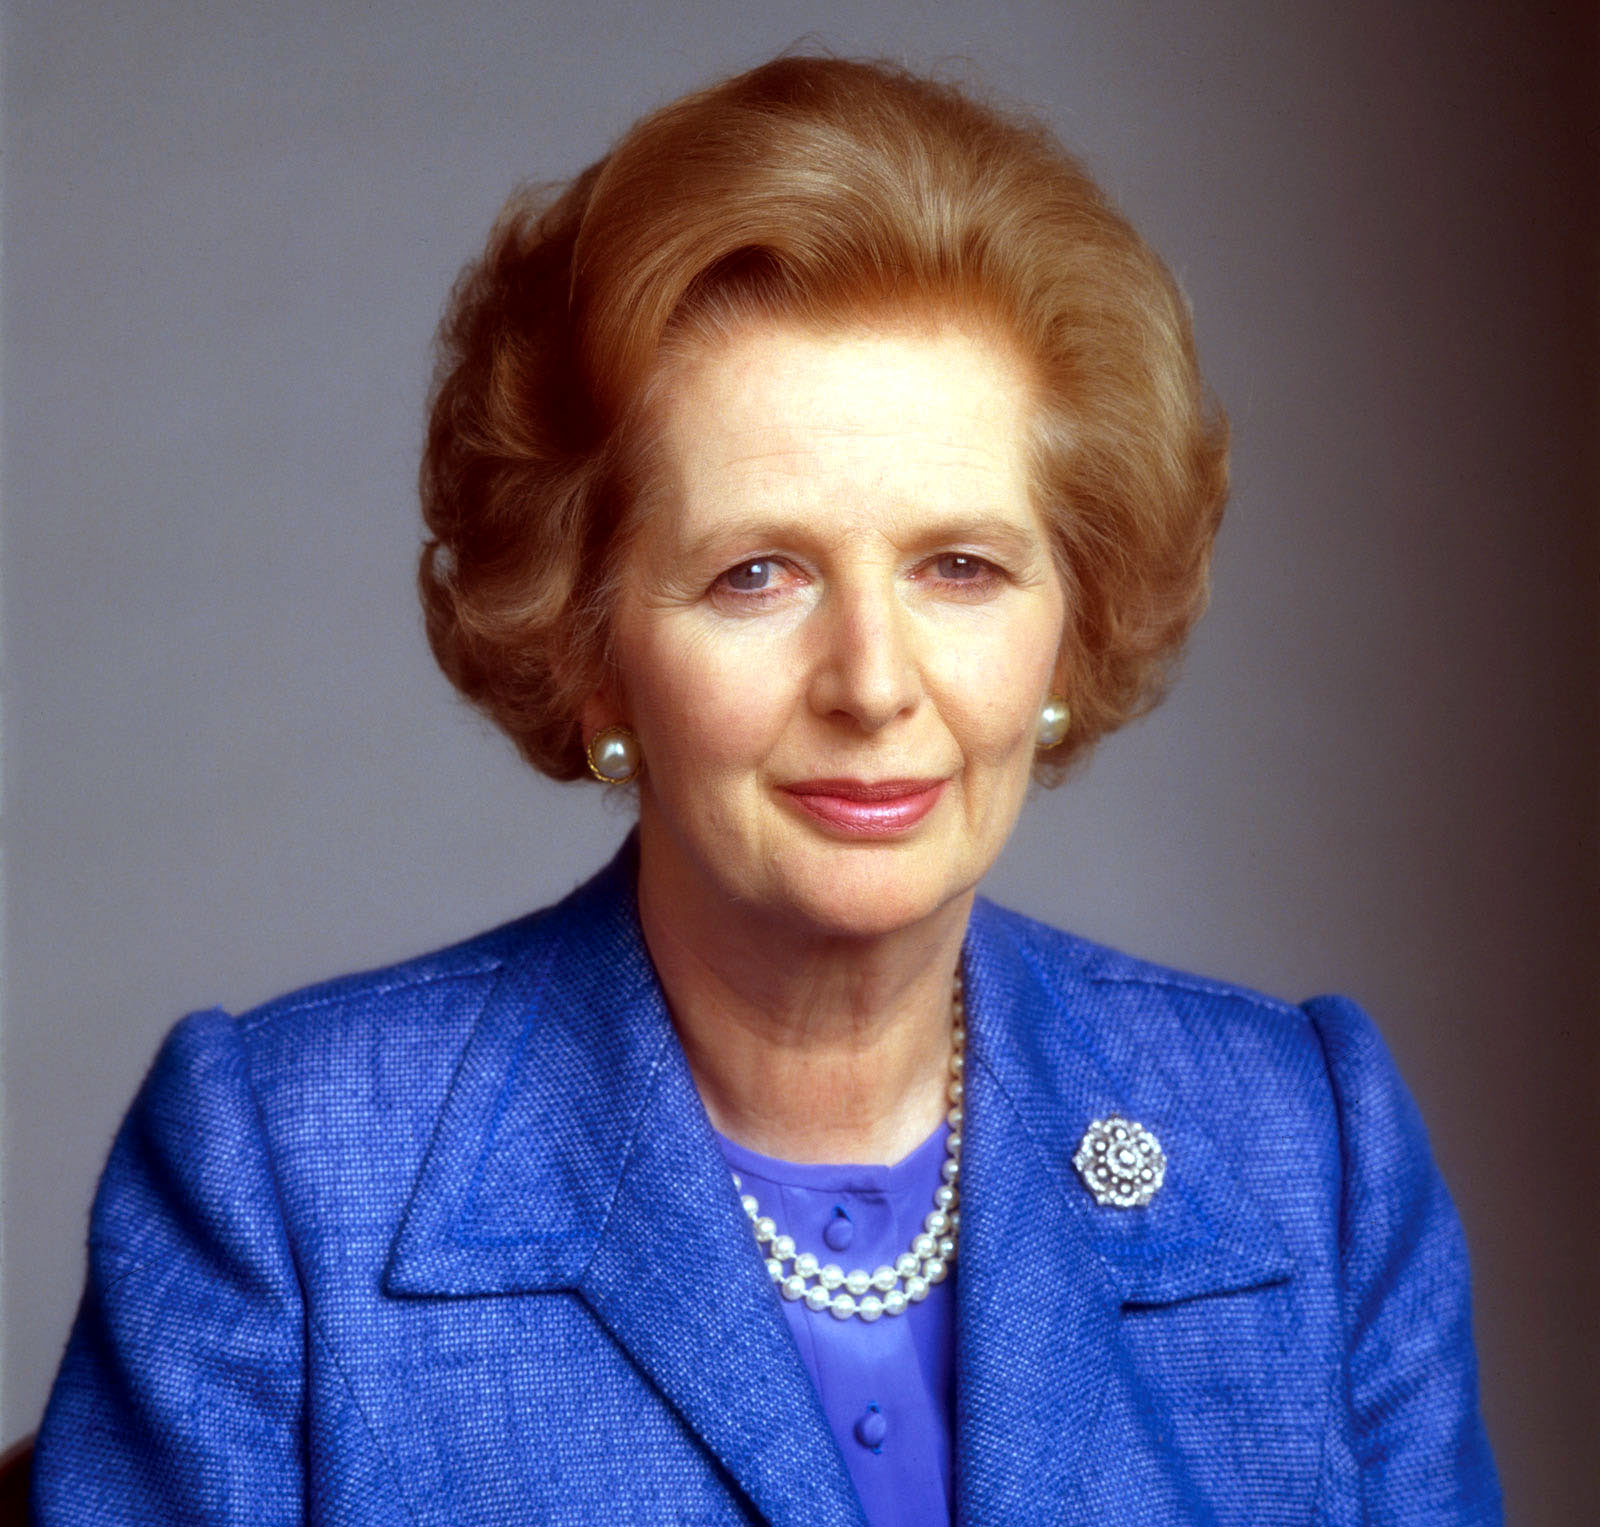 http://thelegacyproject.co.za/wp-content/uploads/2015/04/margaret-thatcher.jpg